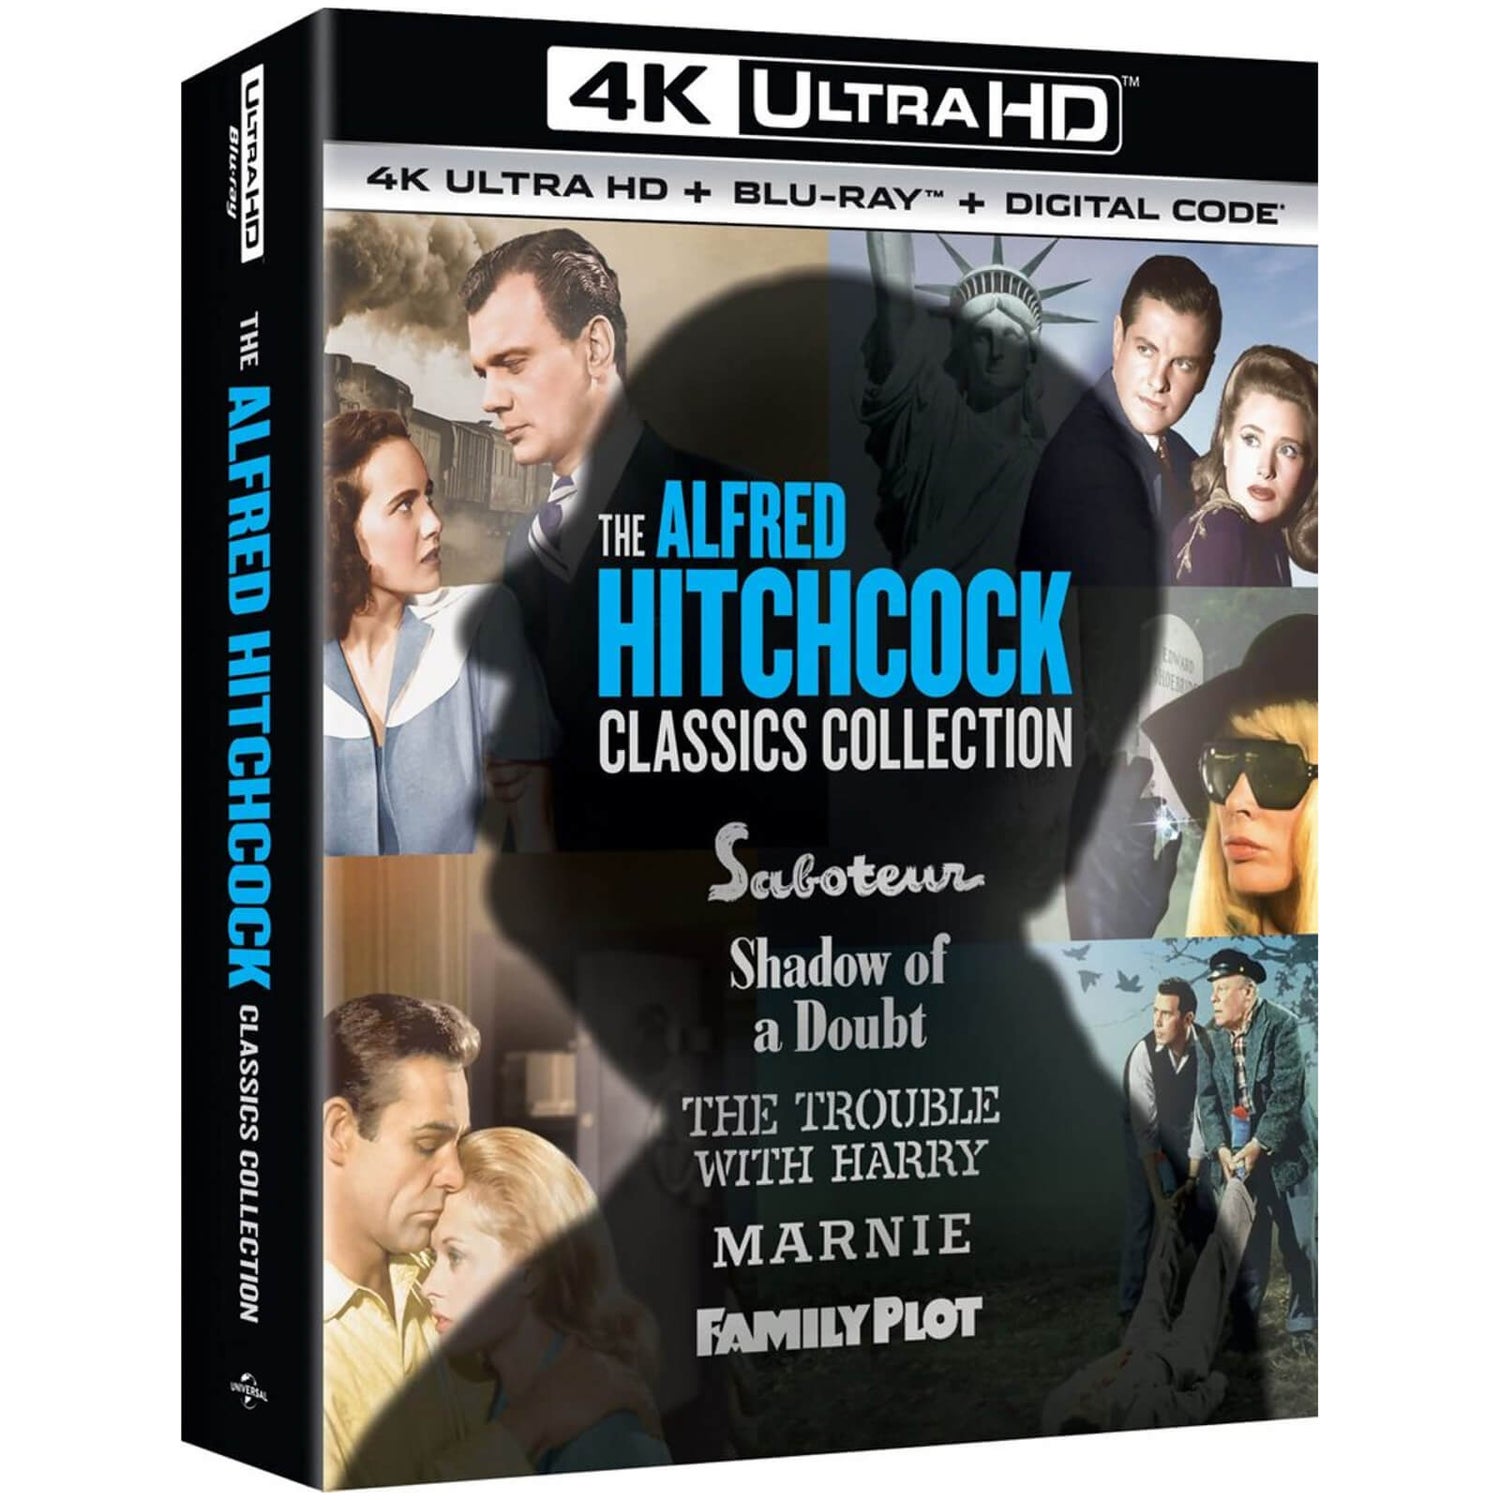 The Alfred Hitchcock Classics Collection - 4K Ultra HD (Includes Blu-ray)